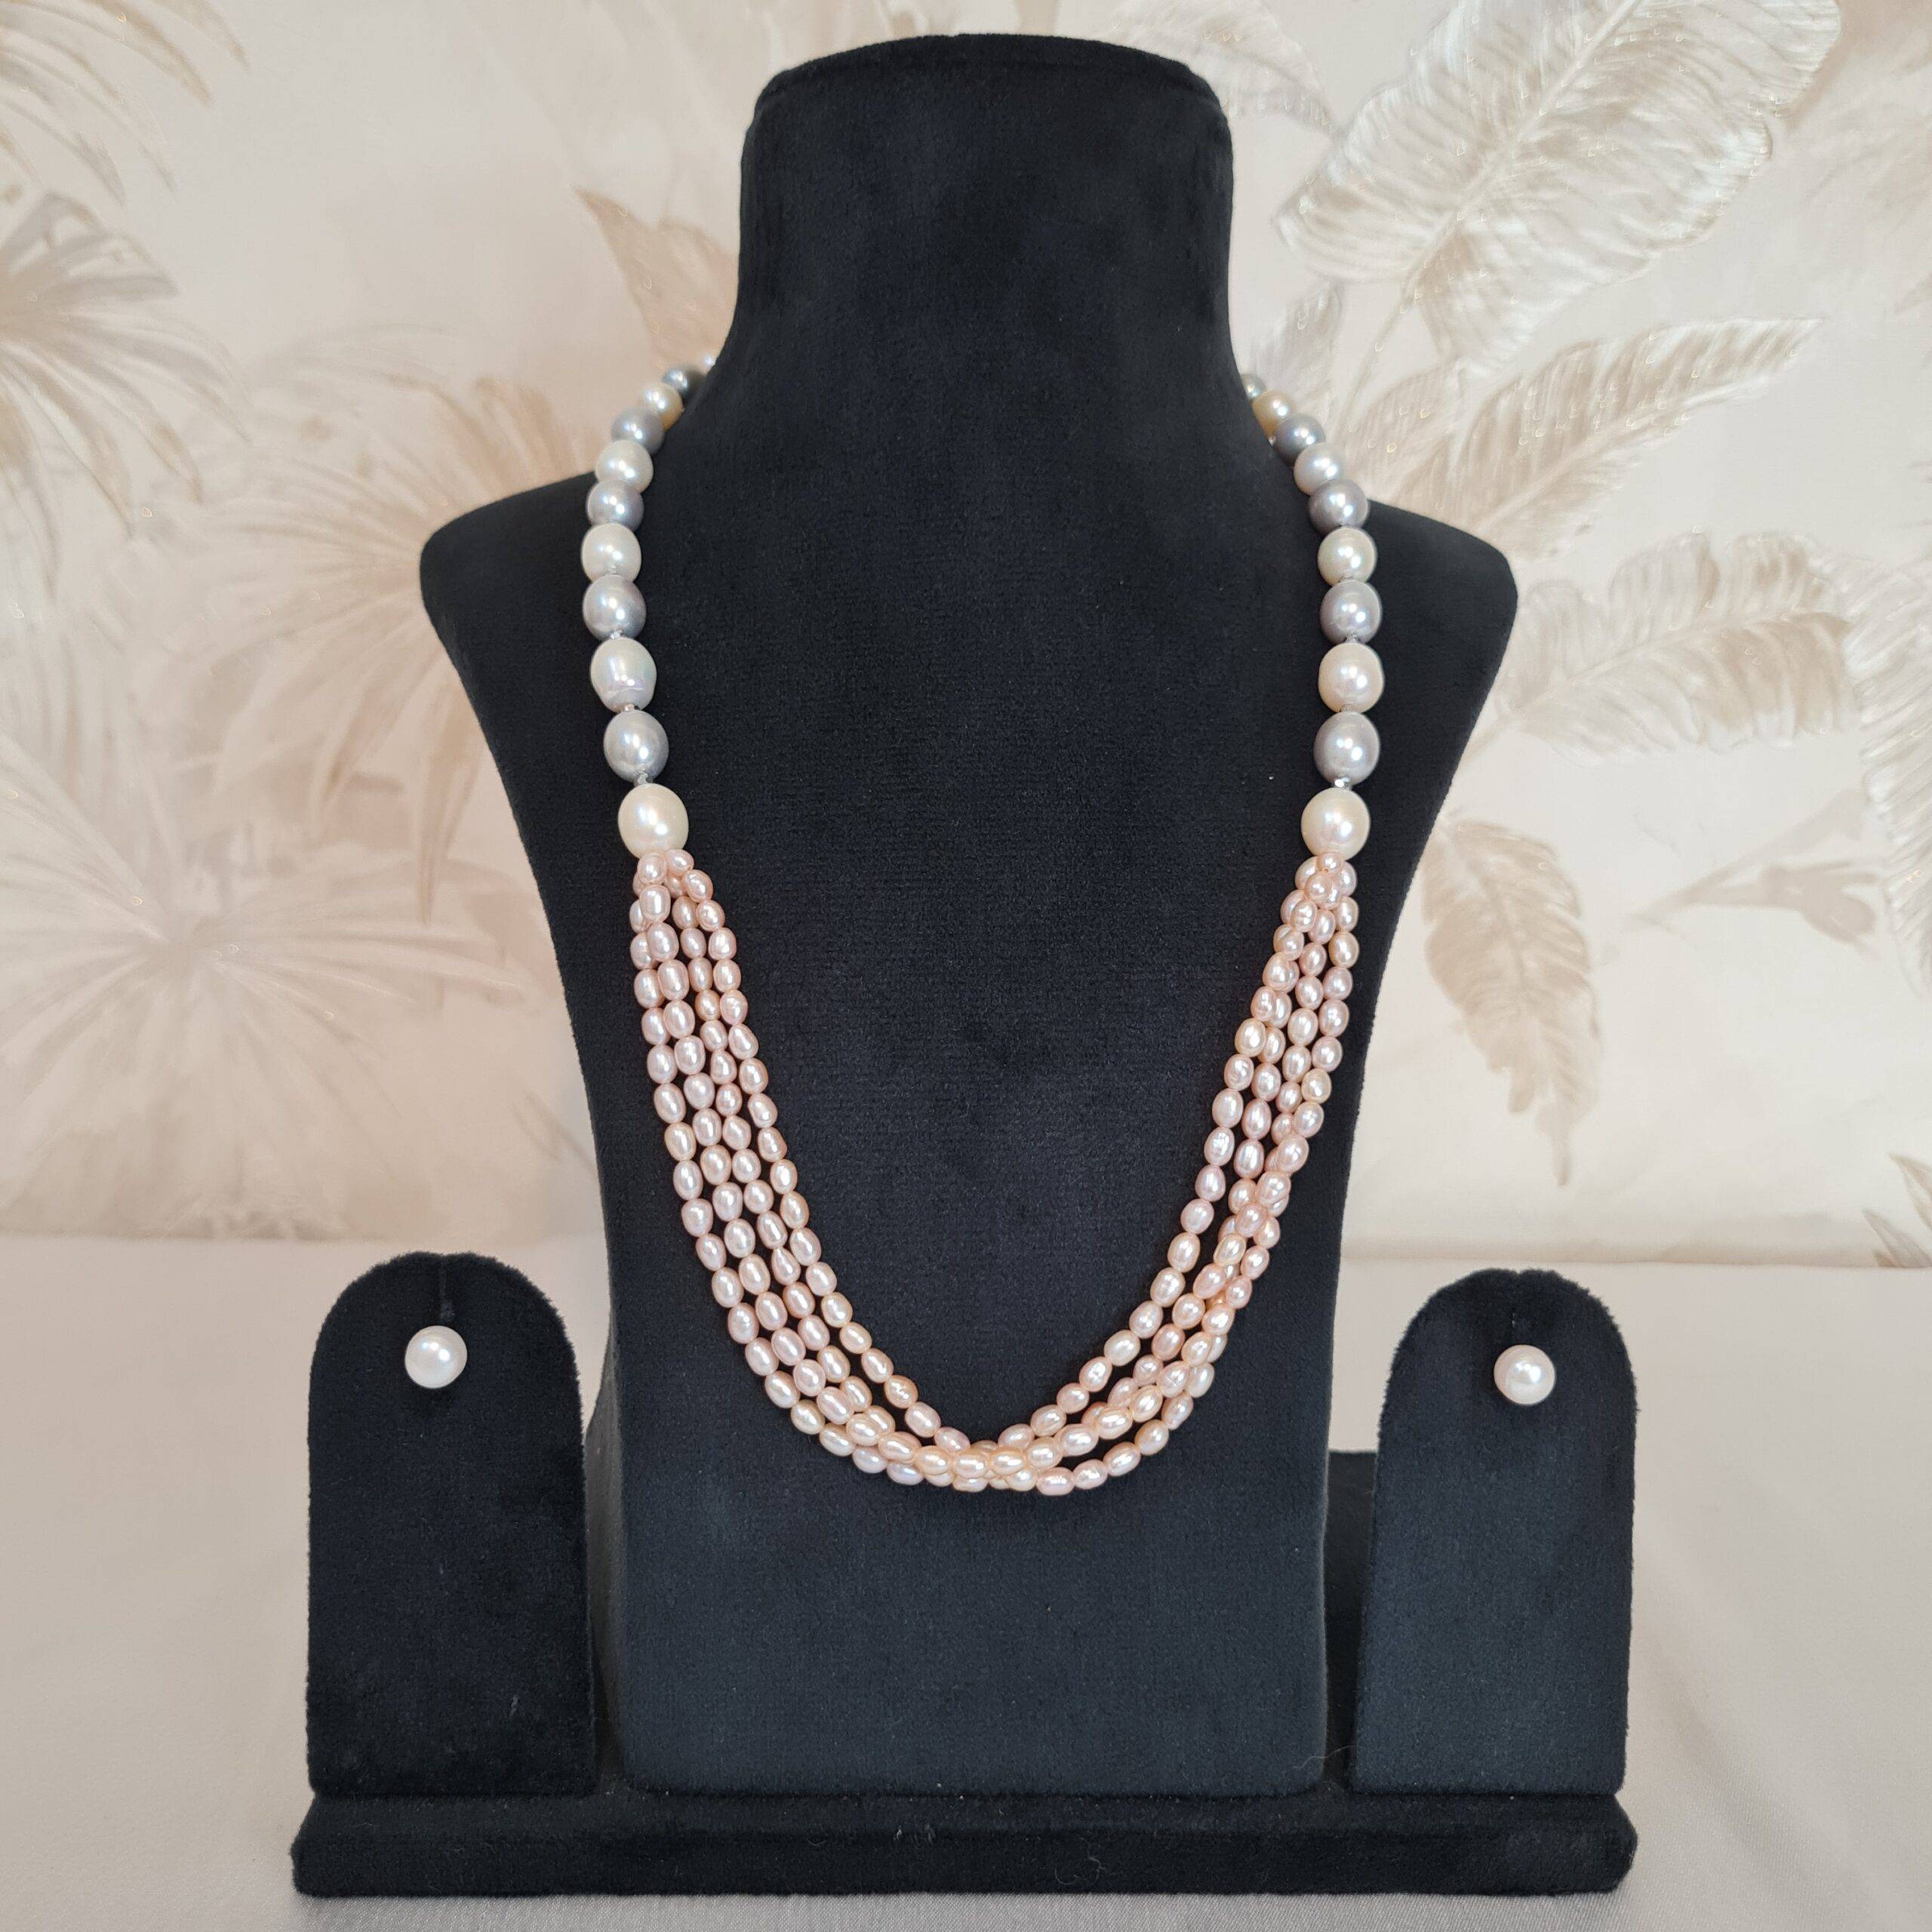 Buy Simulated White Pearl Triple Row Necklace 20-22 Inches in Silvertone at  ShopLC.